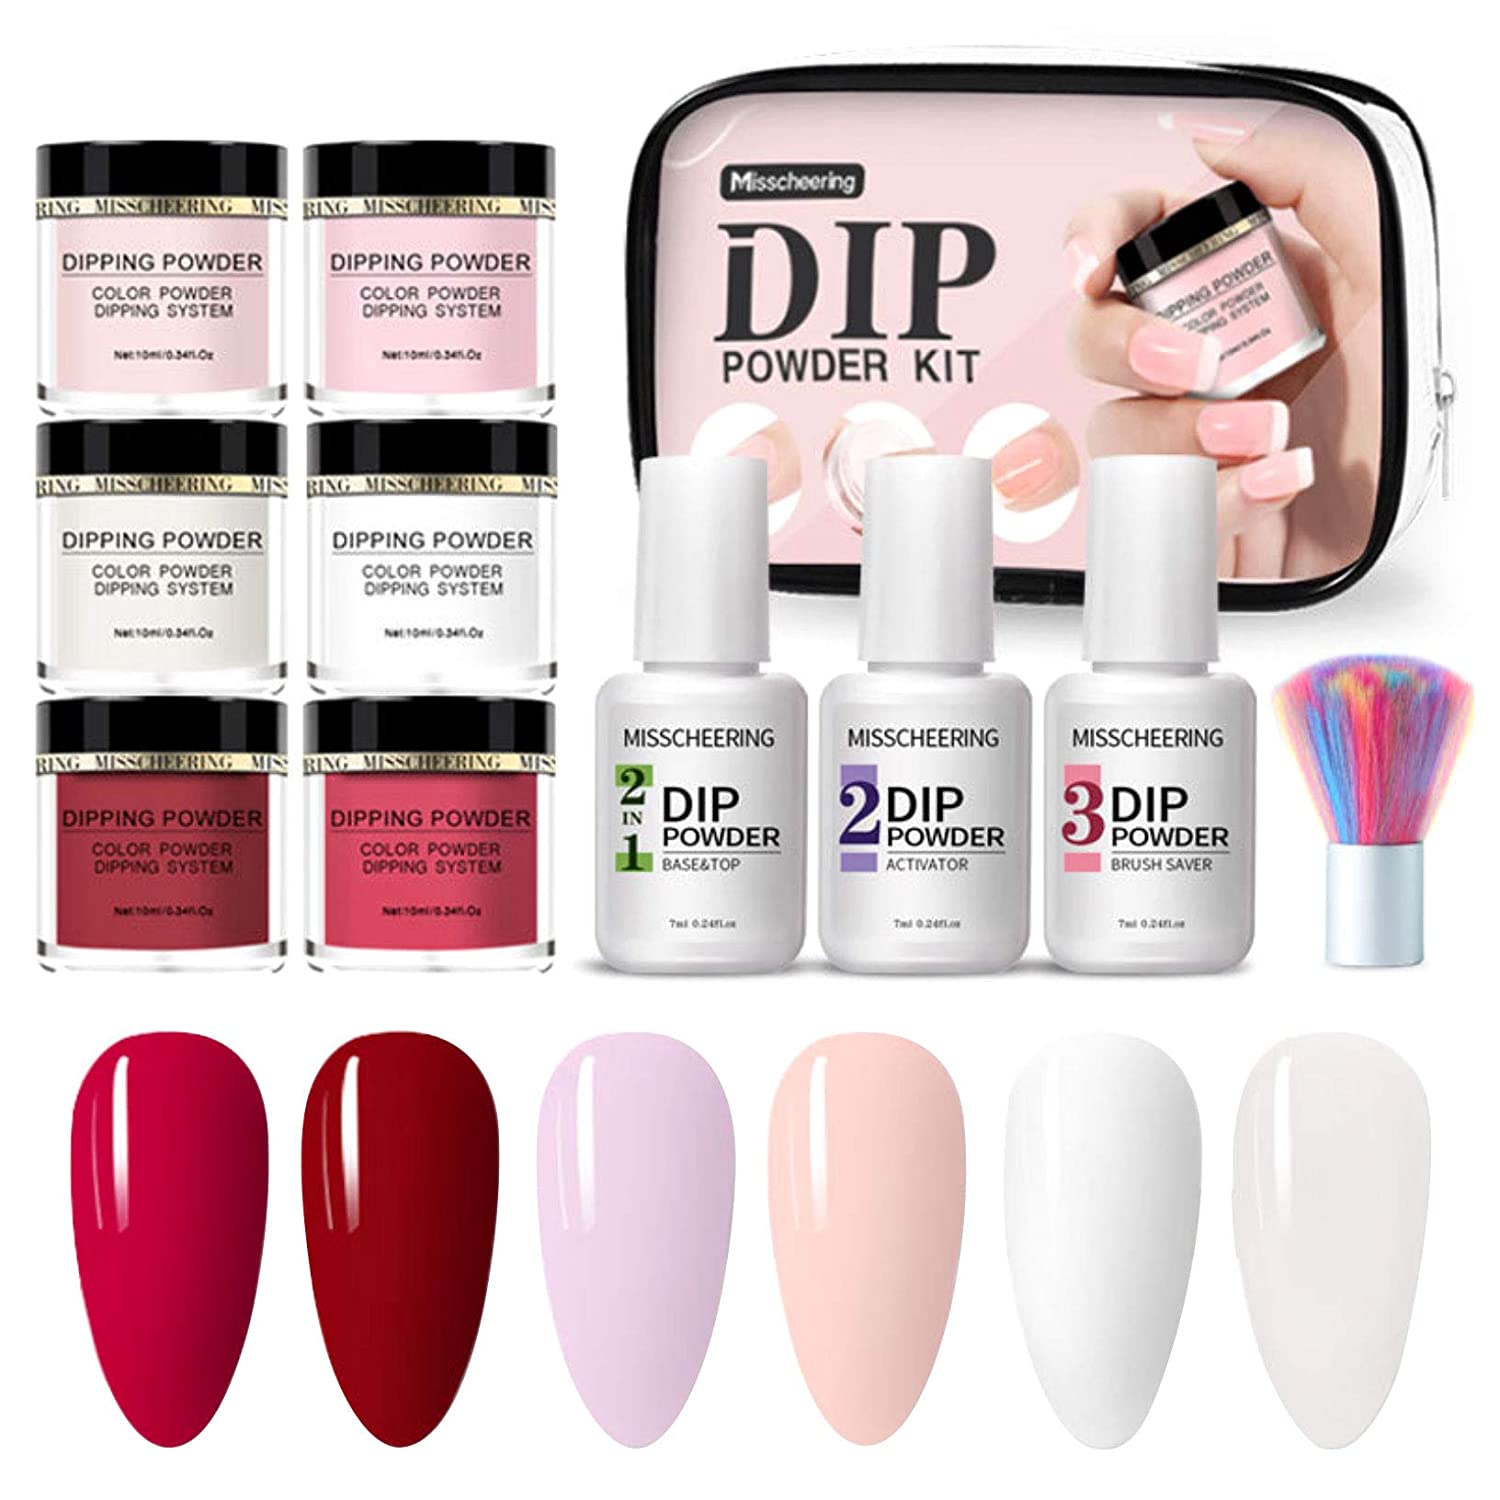 St. Mege Dipping powder Nail starter Kit of 6 colors for French Nail